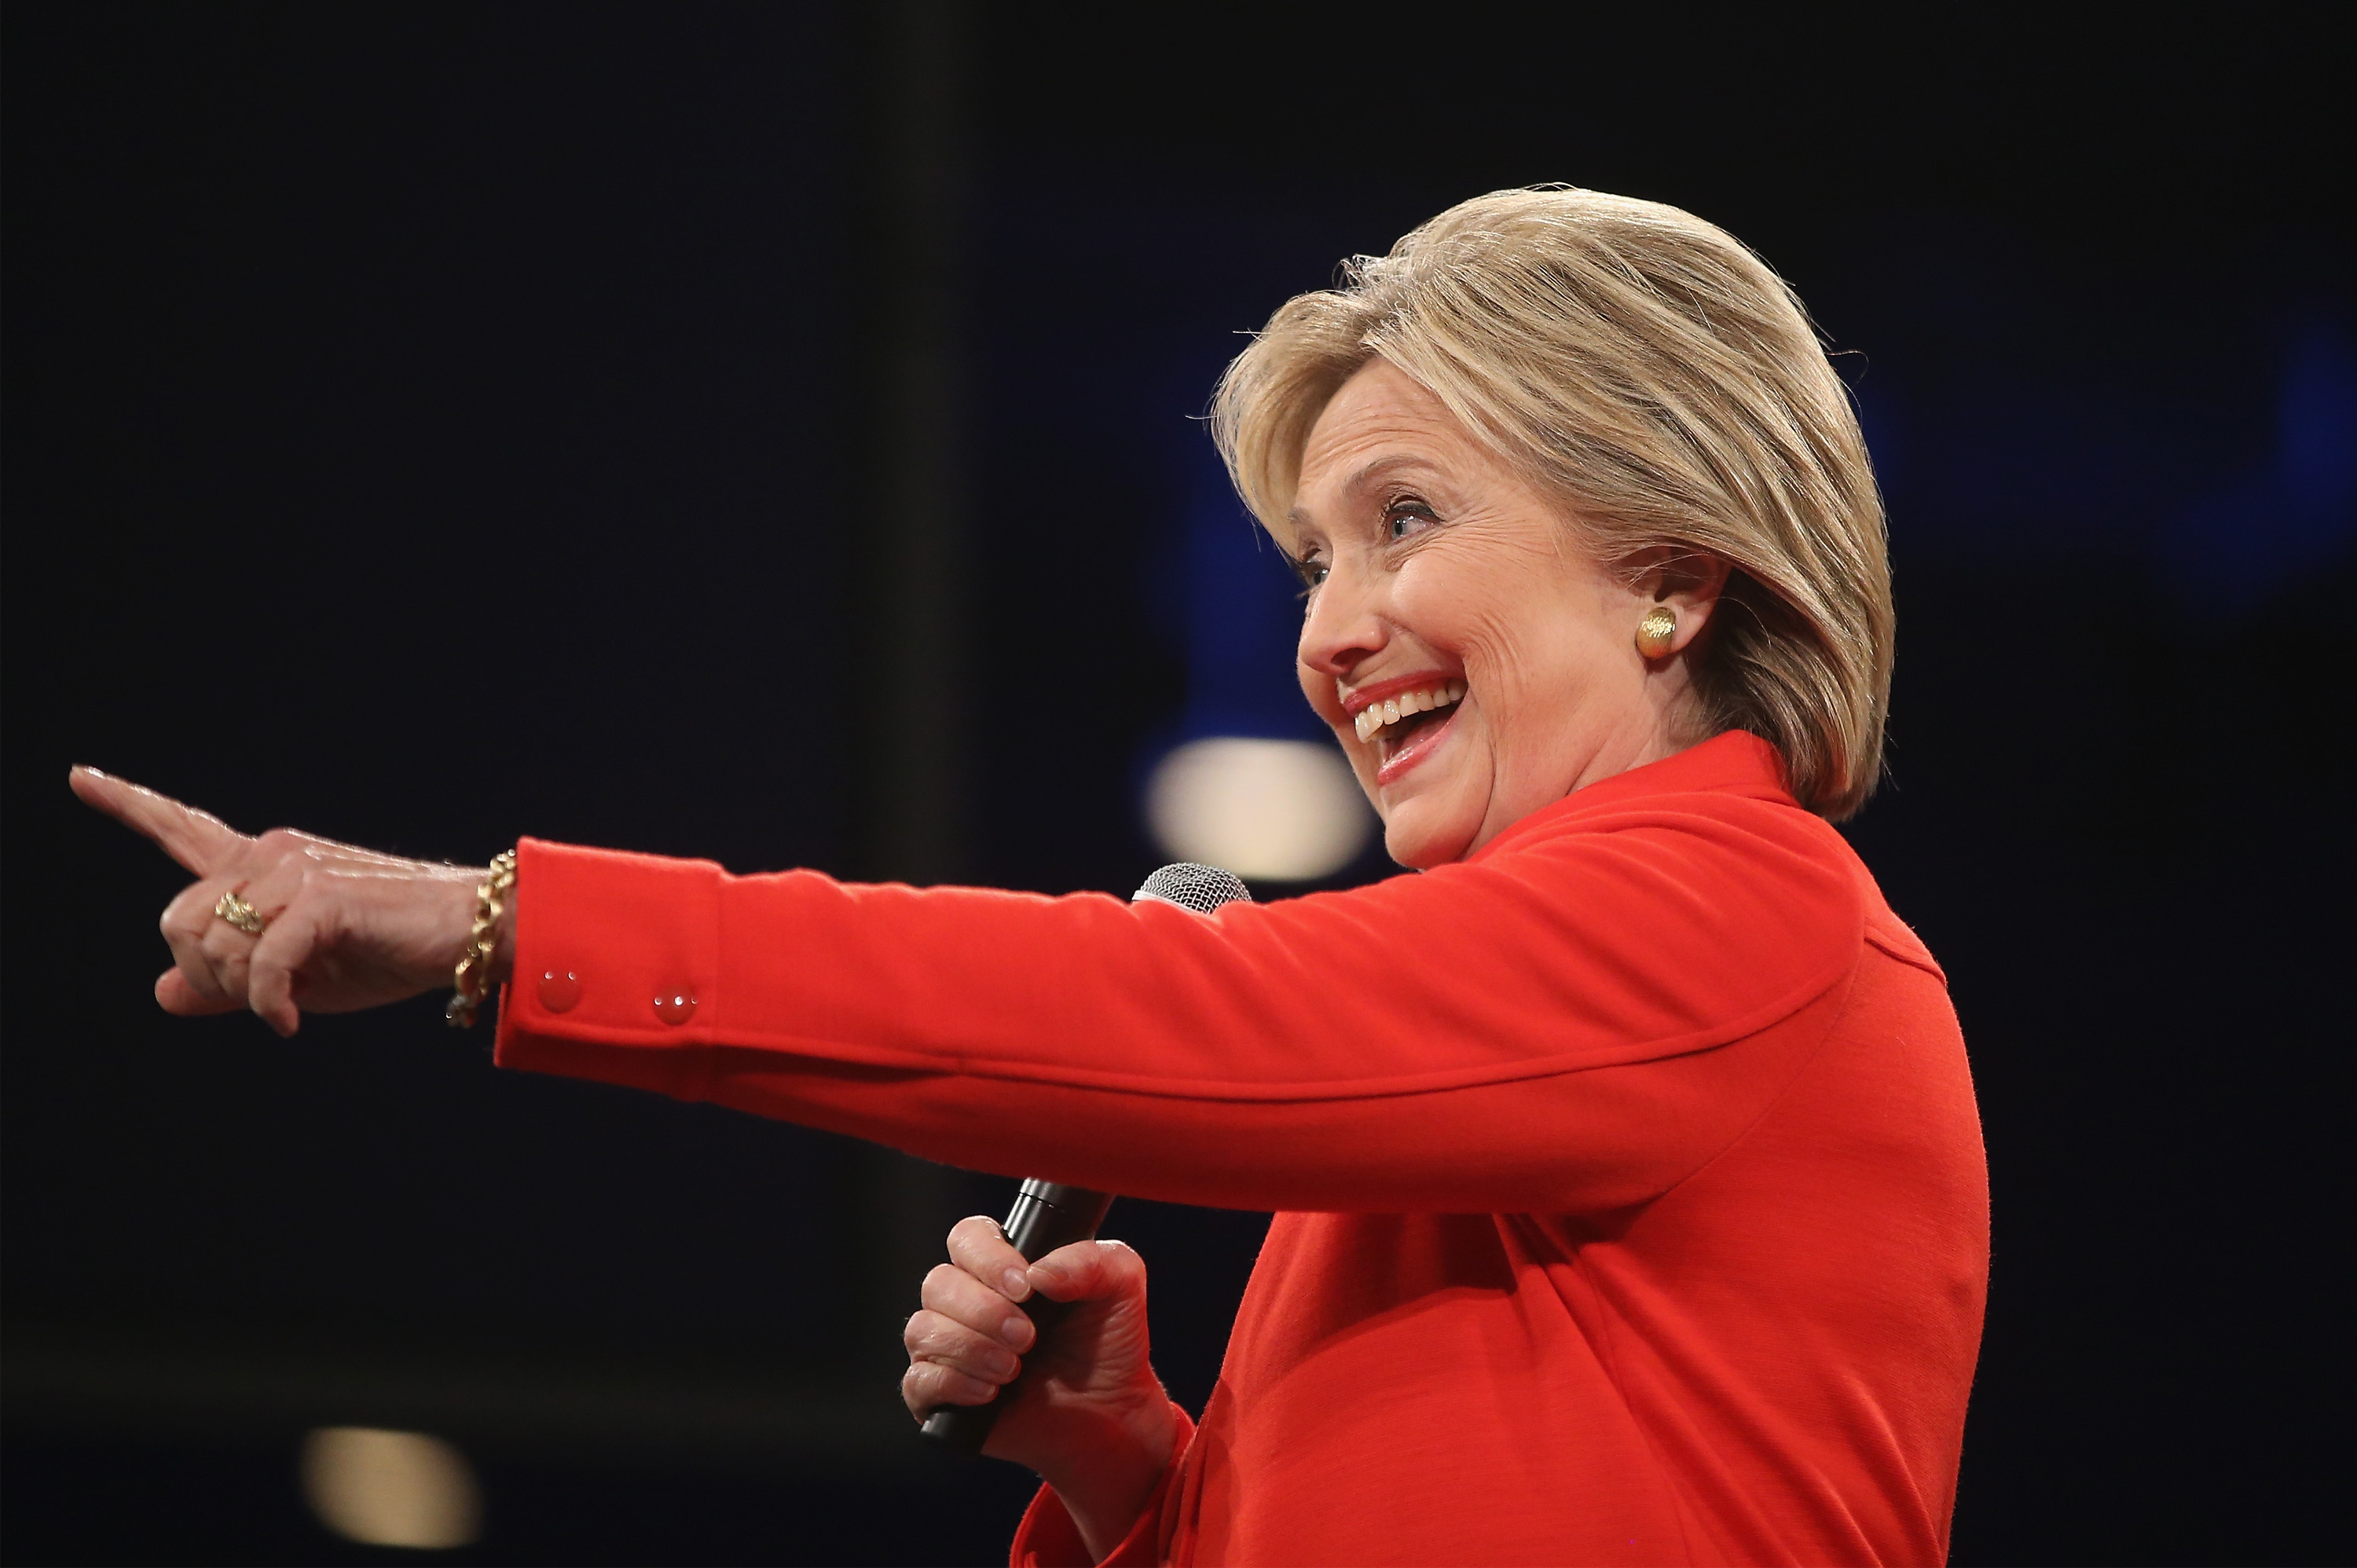 Hillary Clinton on October 24, 2015 in Des Moines, Iowa. (Scott Olson—Getty Images)